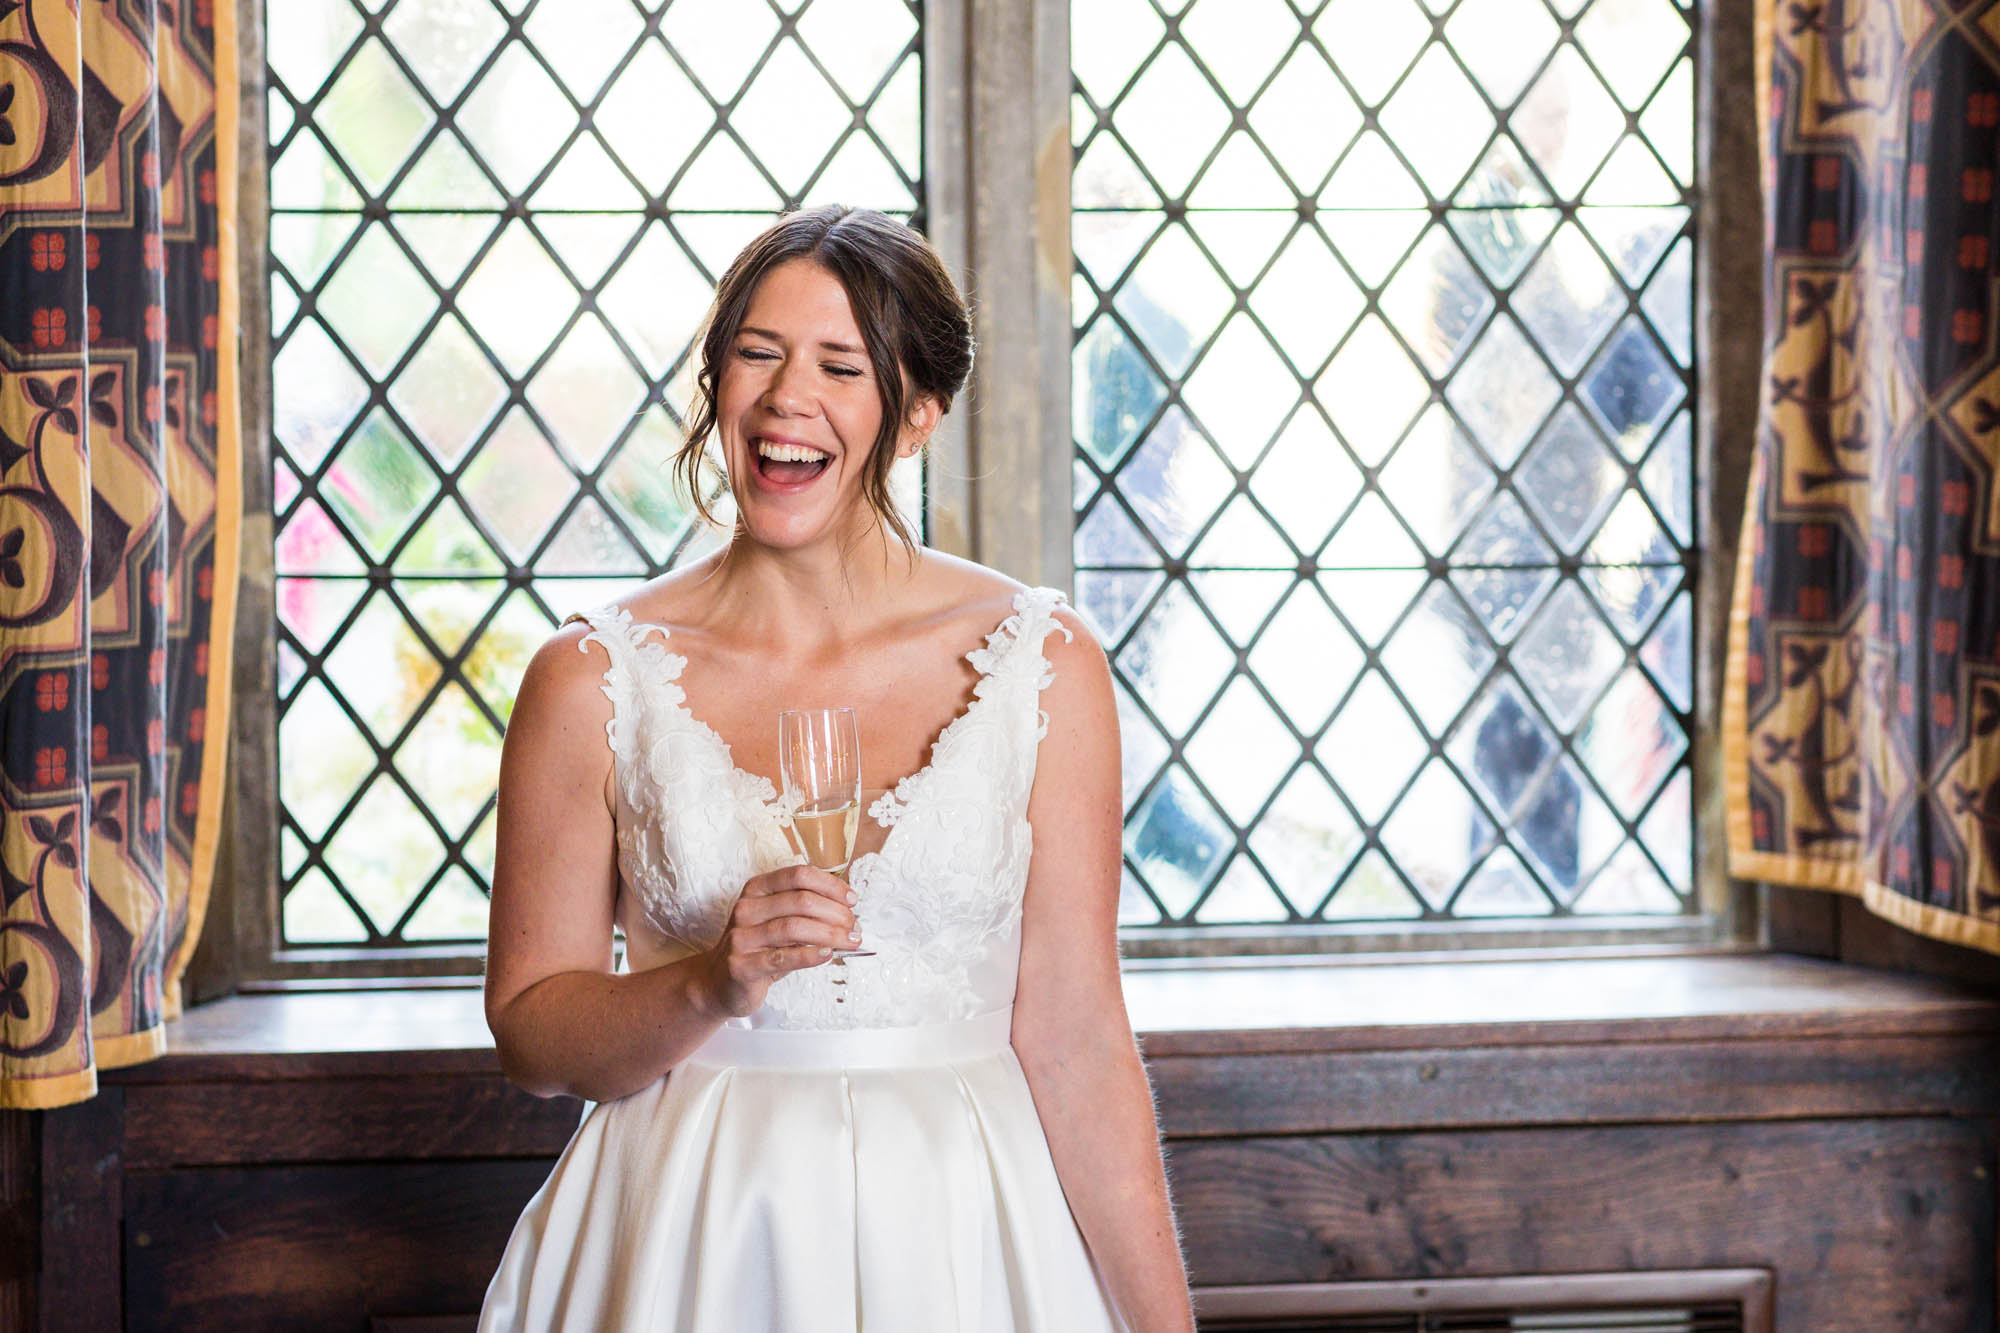 Lizzy and Rich getting married at Lympne Castle in Kent, captured by Benjamin Toms Photography